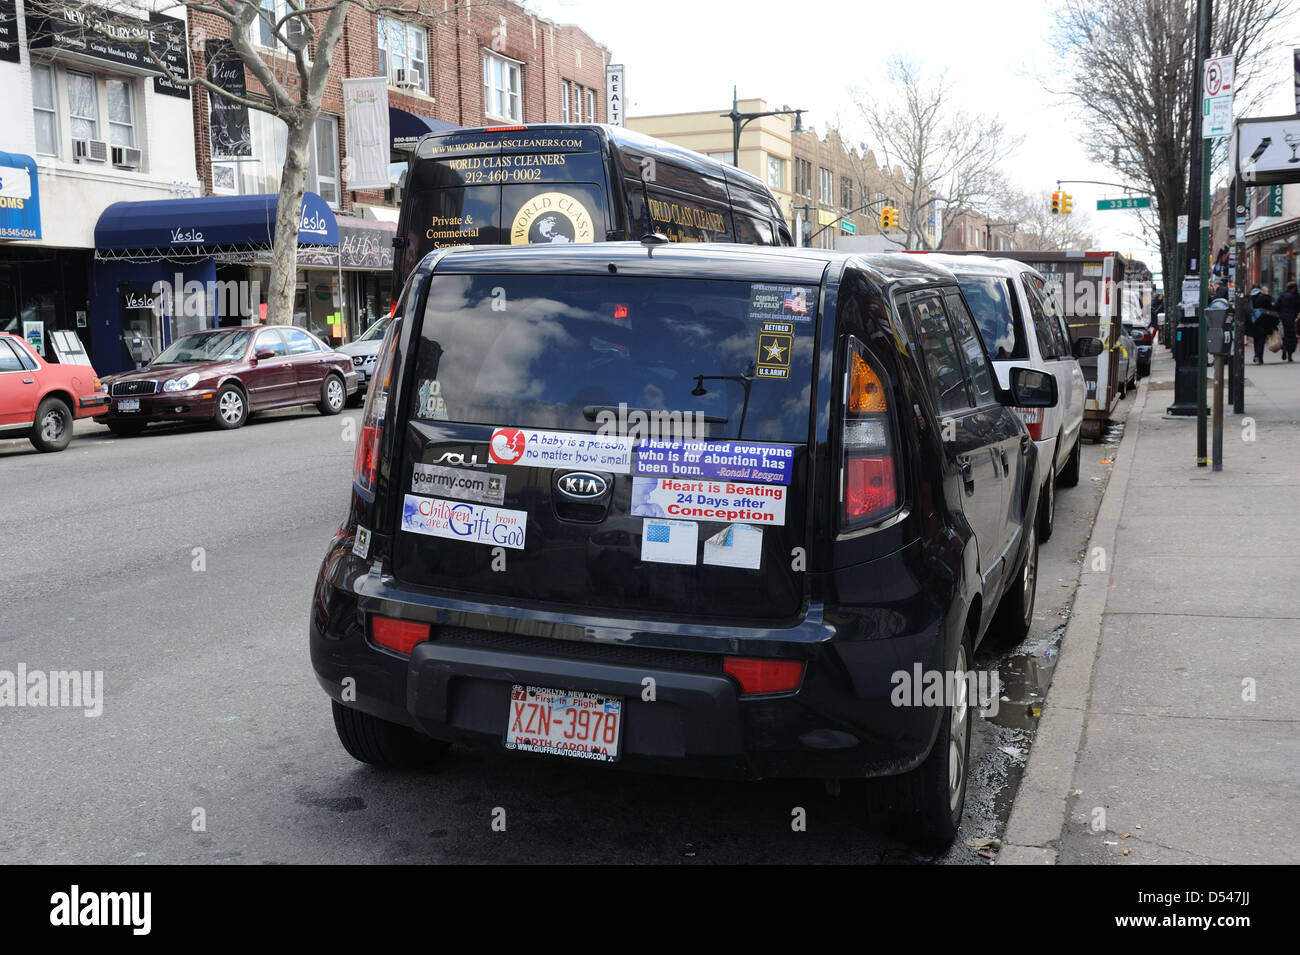 A car on a street in Astoria, Queens, plastered with anti-abortion stickers. March 23, 2013 Stock Photo